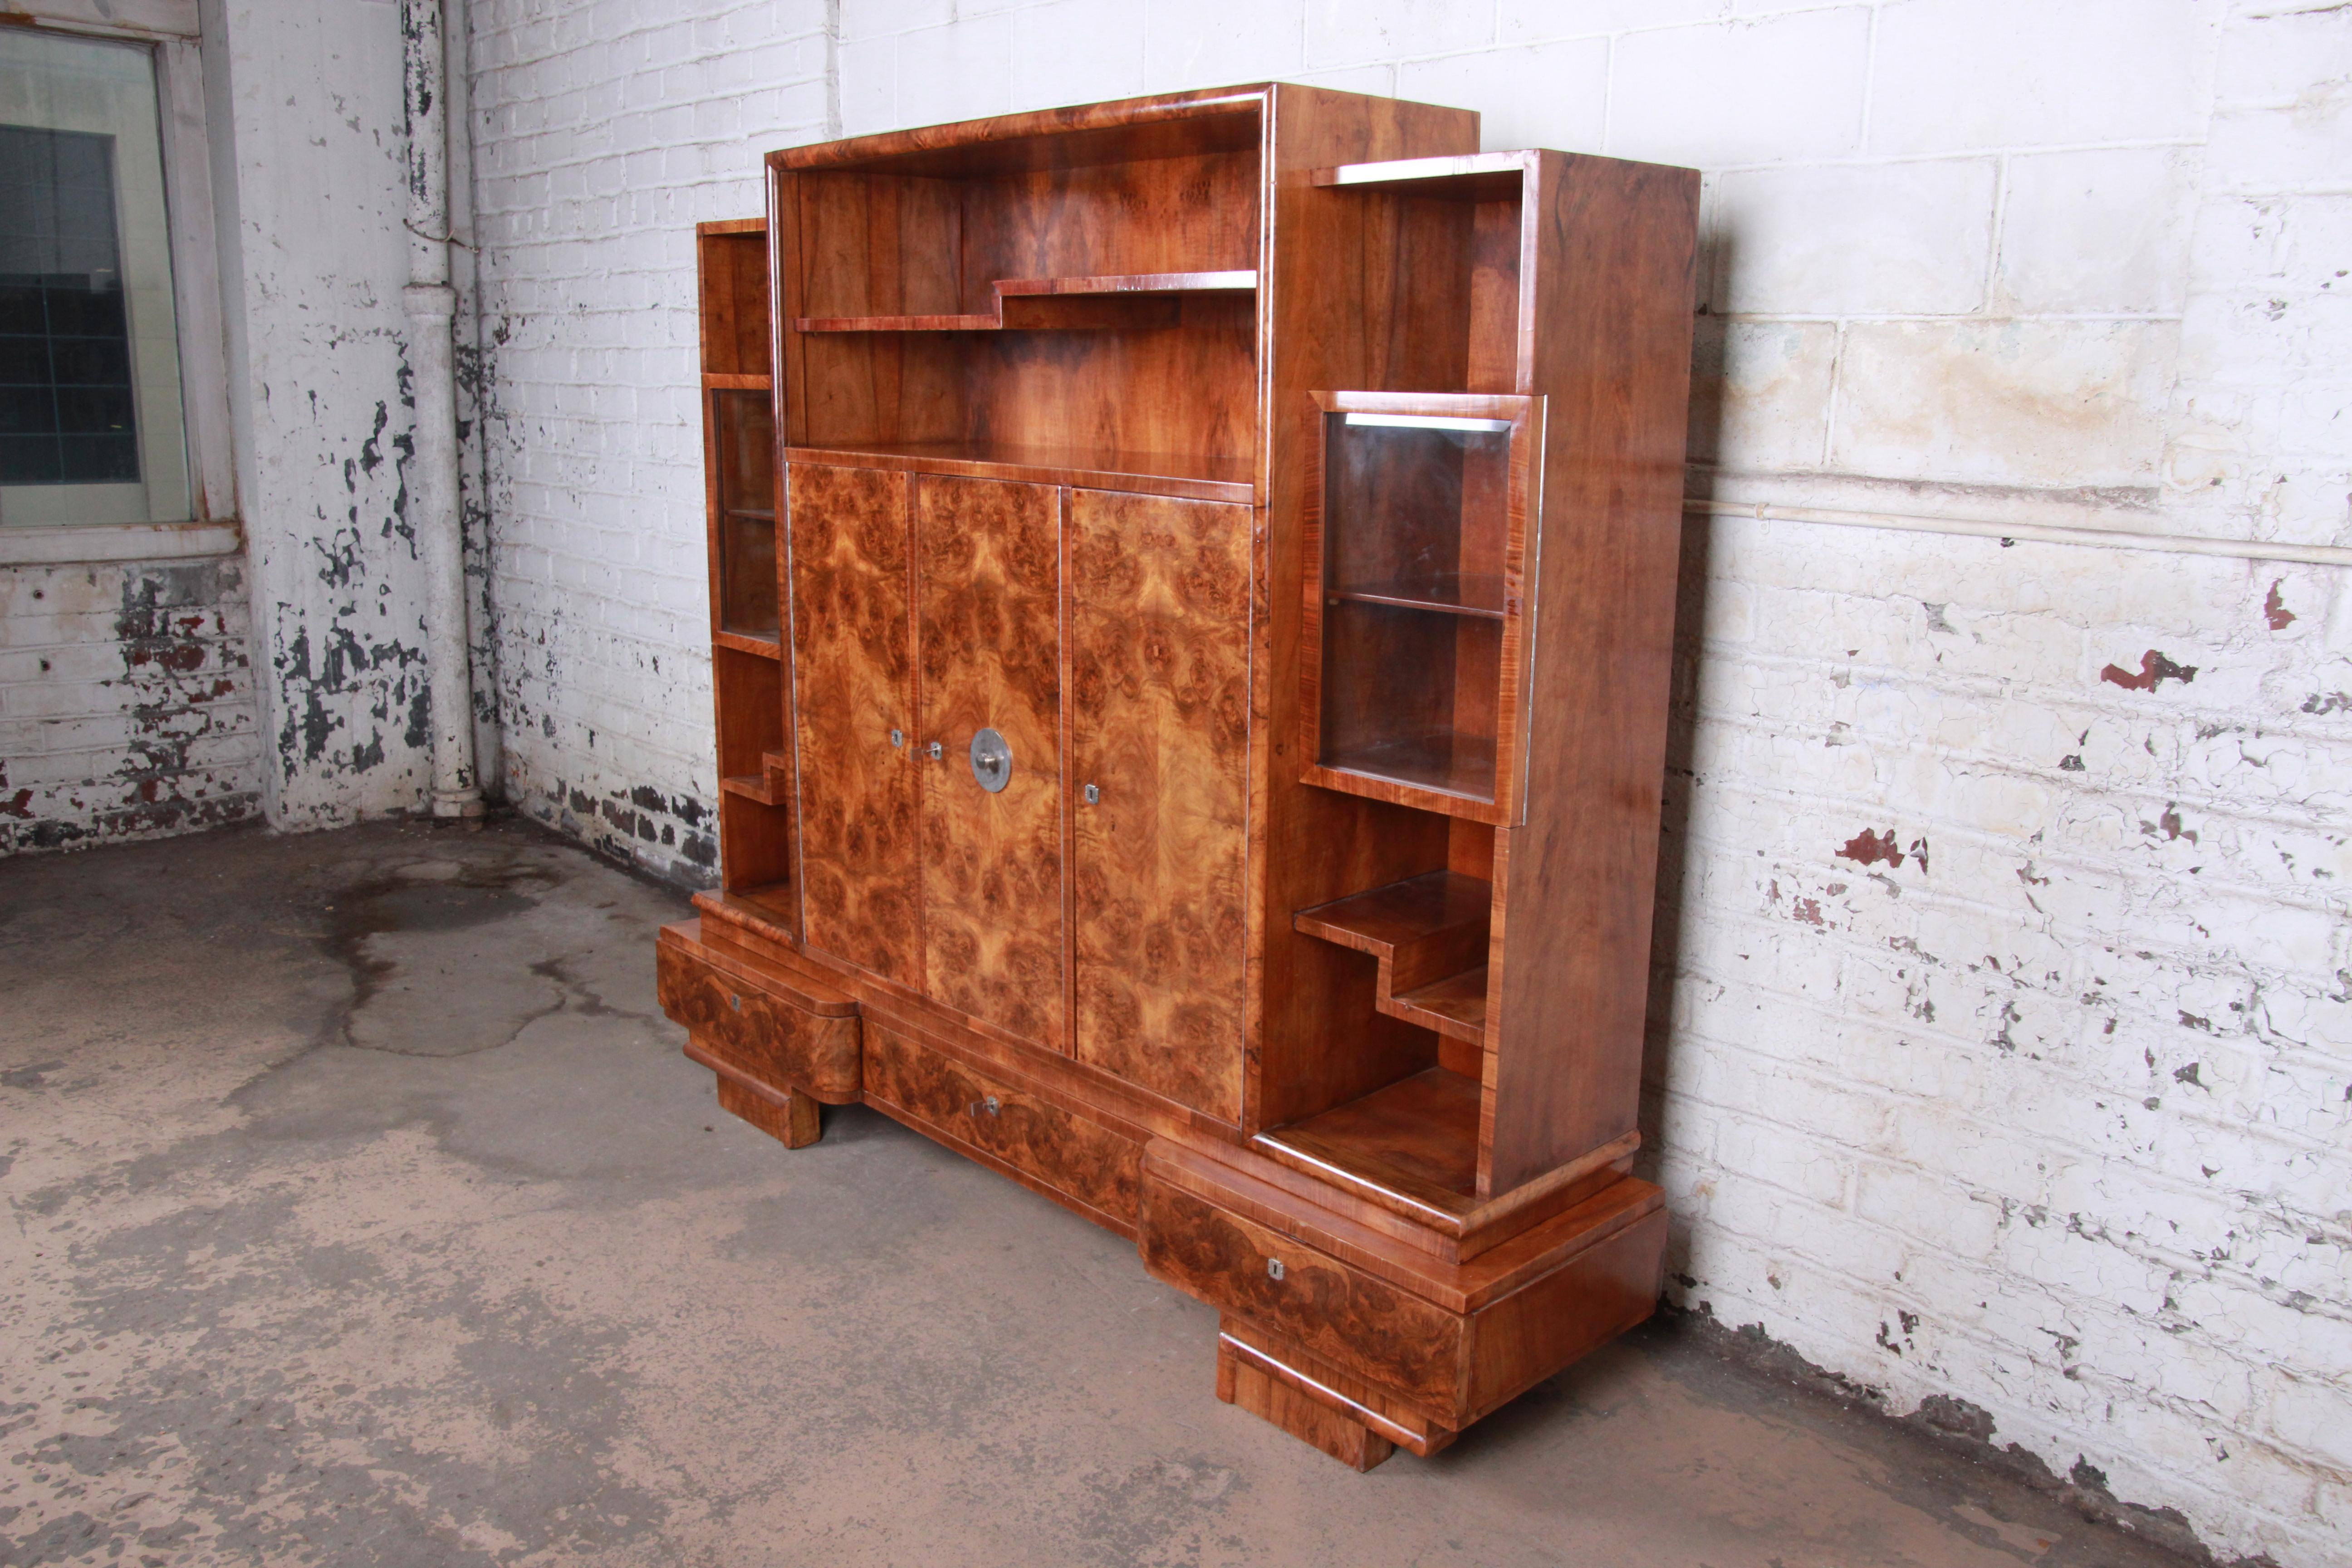 An extremely rare and exceptional Art Deco bookcase wall unit or bar cabinet

Designed by famed architect Lajos Kozma

Hungary, 1930s

Bookmatched burled rosewood and chrome hardware and glass

Measures: 79.75